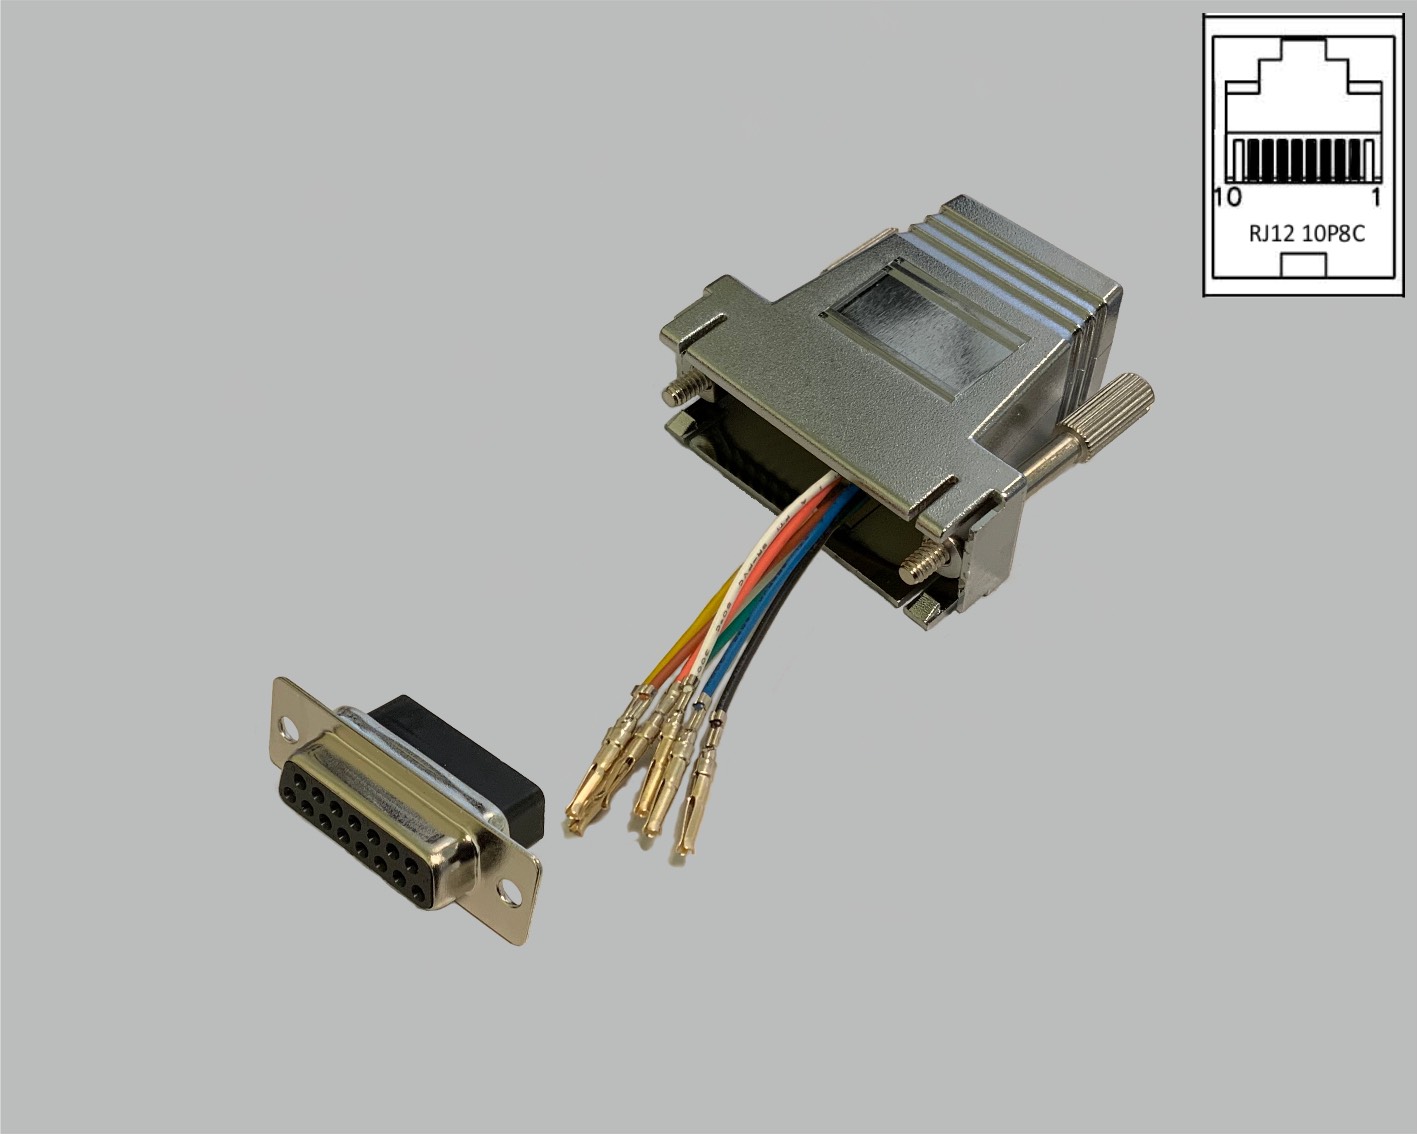 D-Sub/RJ adapter, freely configurable, D-Sub female connector 15-pole to RJ45 (10P8C) female connector, metallised